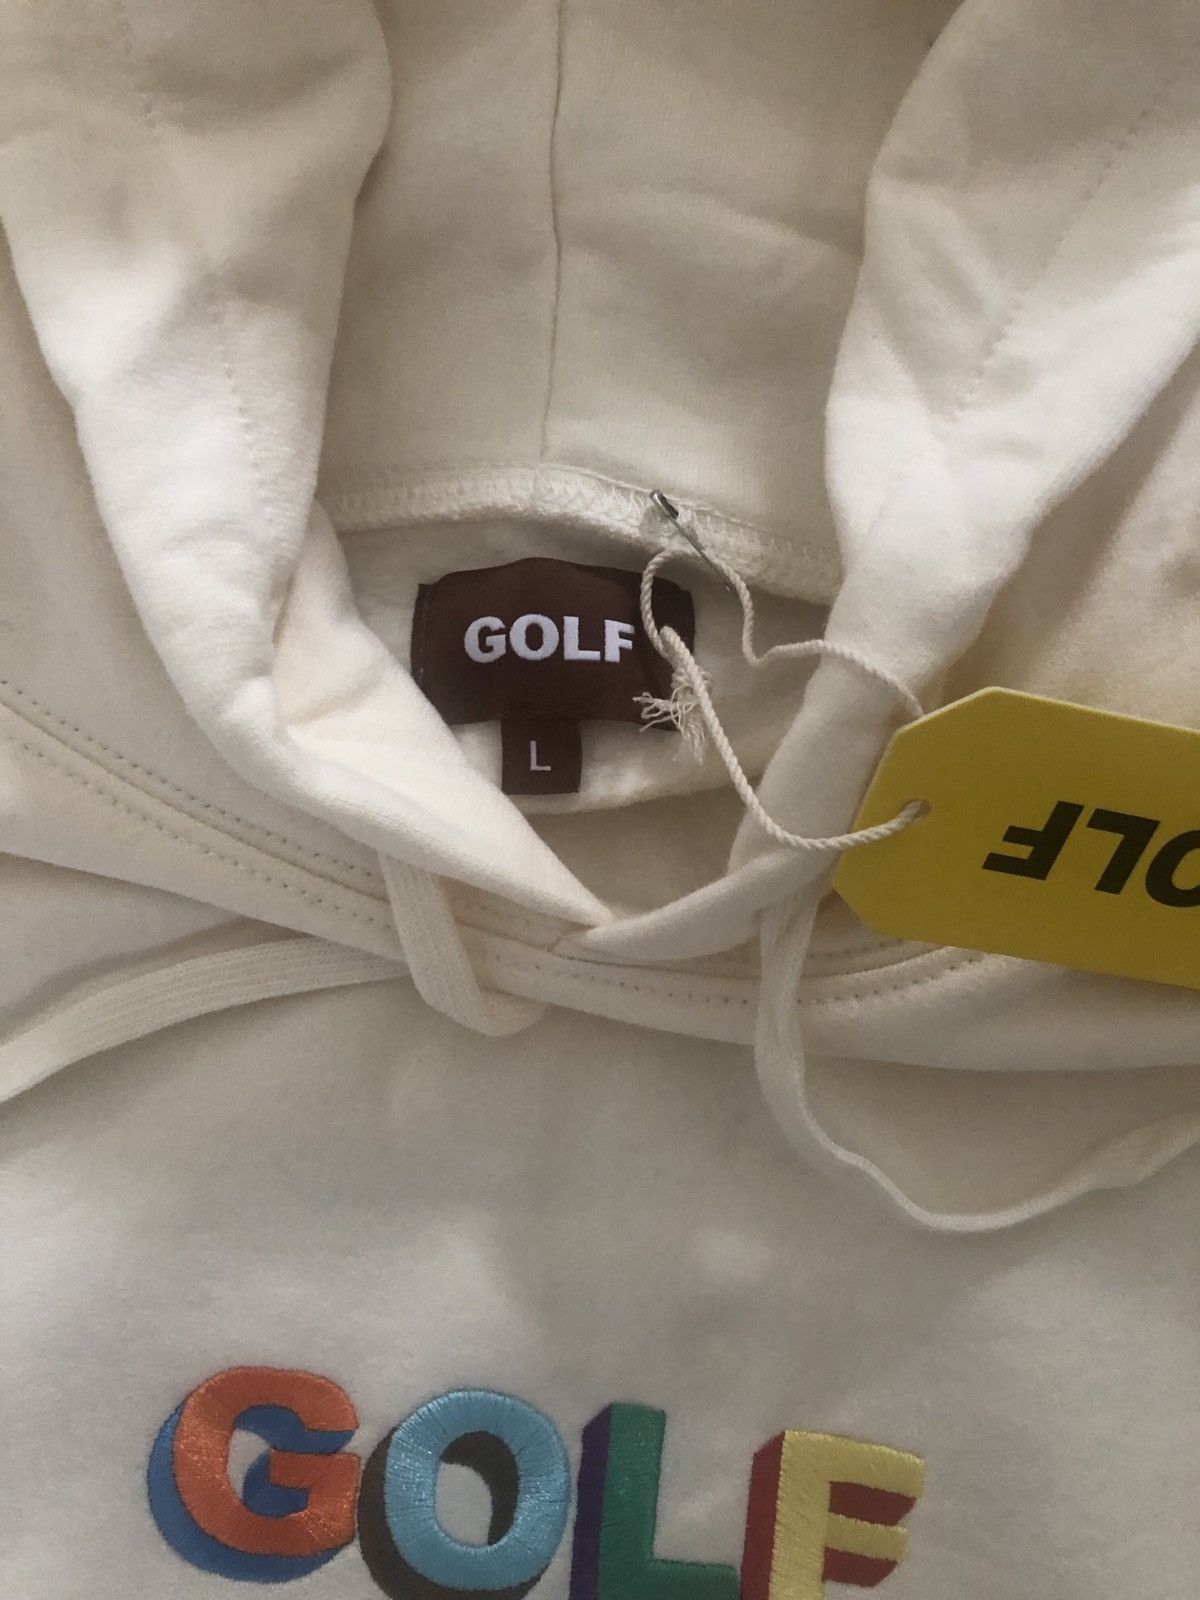 Golf Wang Multi Color 3D Golf Hoodie in Cream Size Large Size US L / EU 52-54 / 3 - 5 Thumbnail